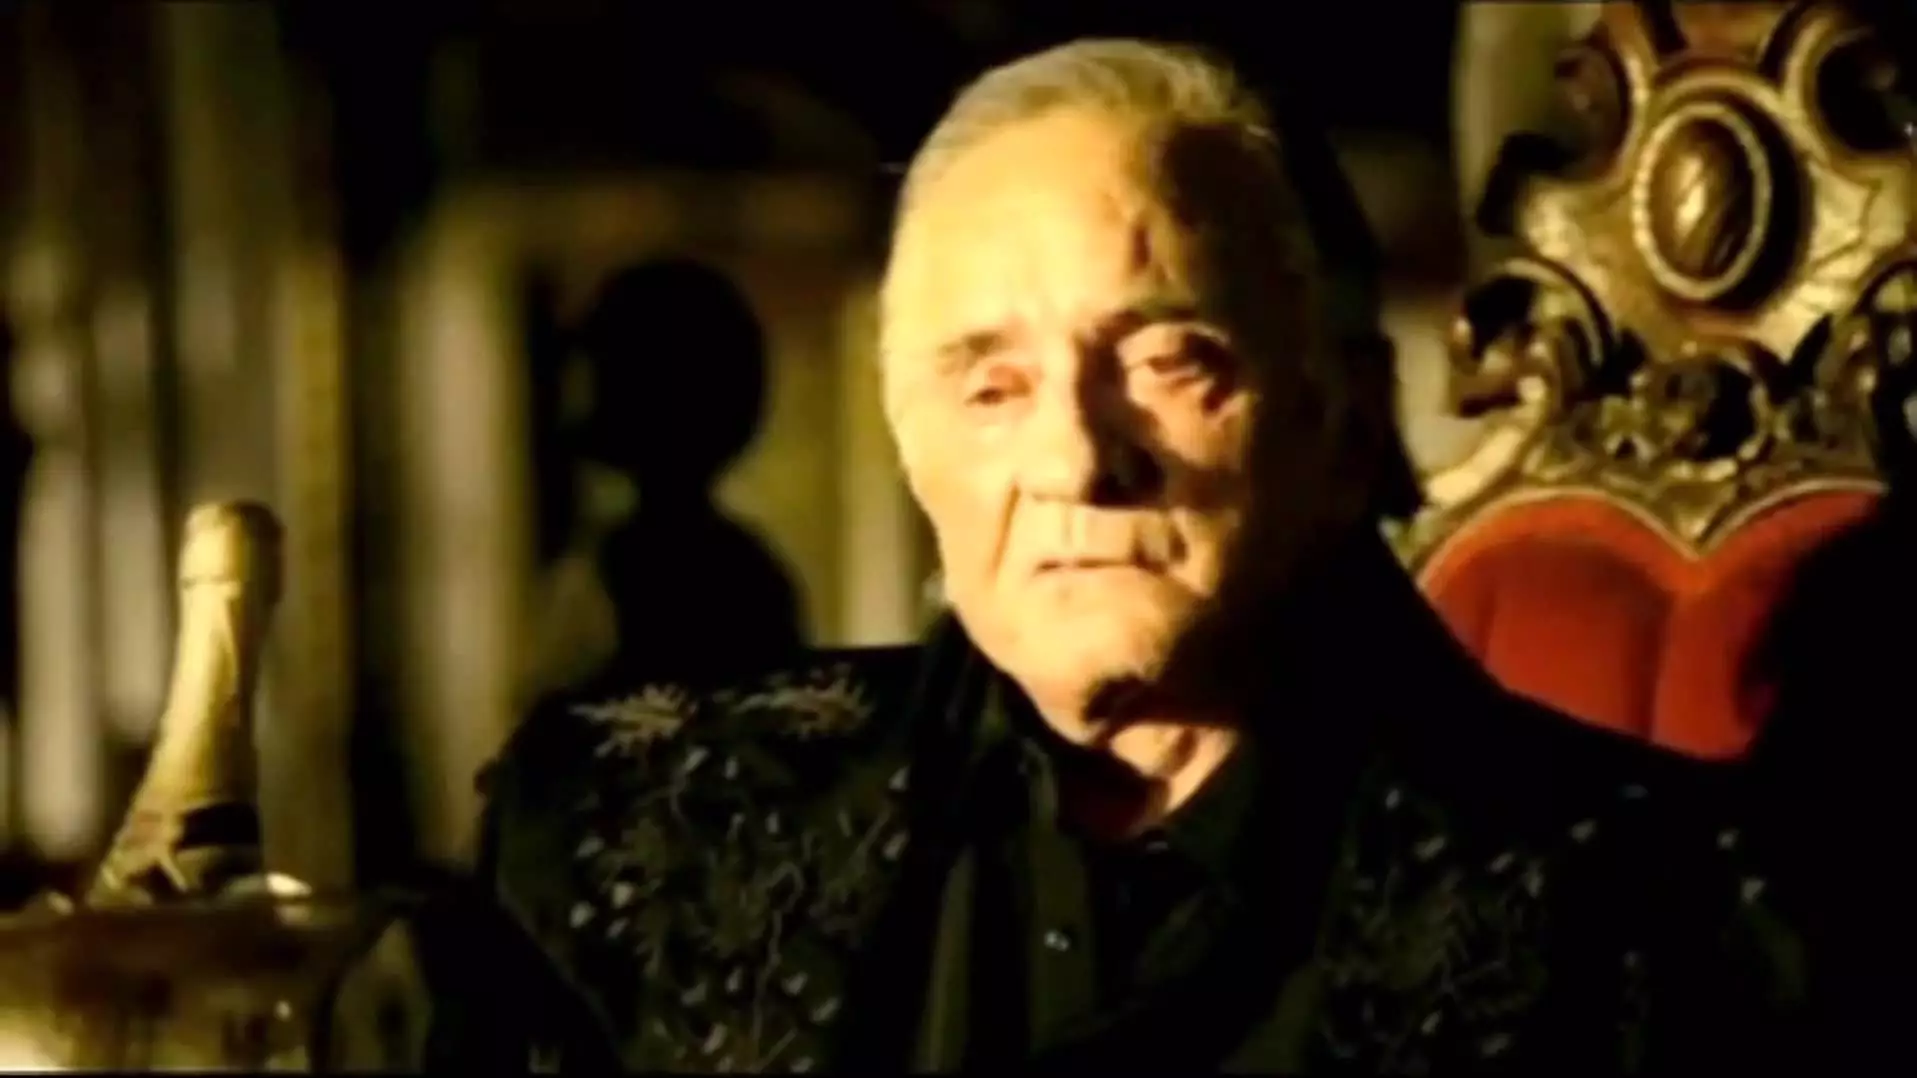 Johnny Cash's 'Hurt' Remains A Timeless Classic With An Unforgettable Video